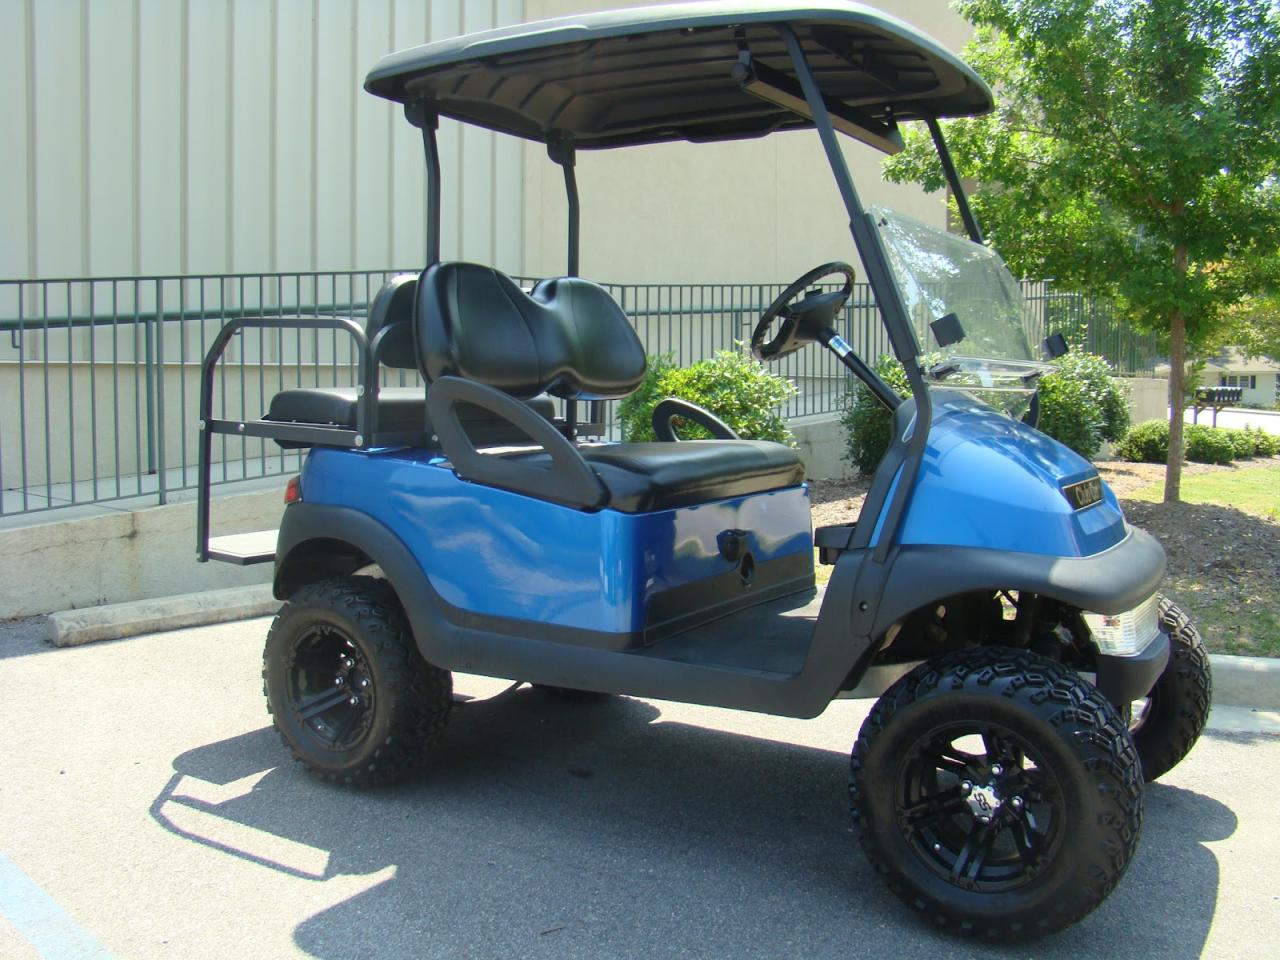 Find Your Dream Ride: Used Golf Carts for Sale by Owner in Washoe, Nevada